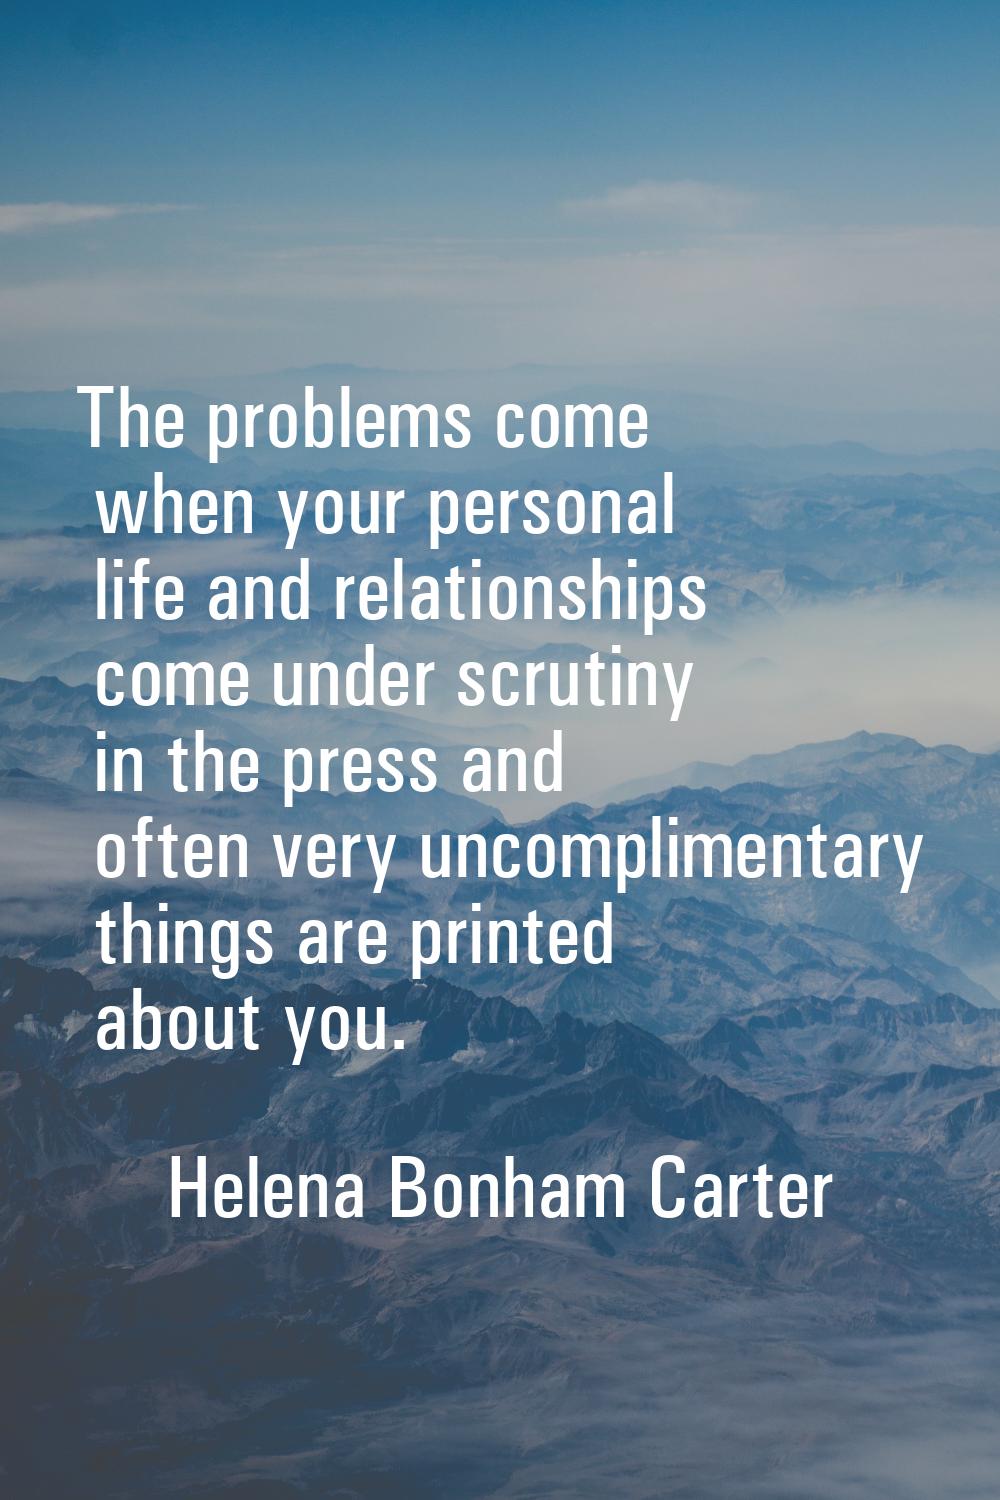 The problems come when your personal life and relationships come under scrutiny in the press and of